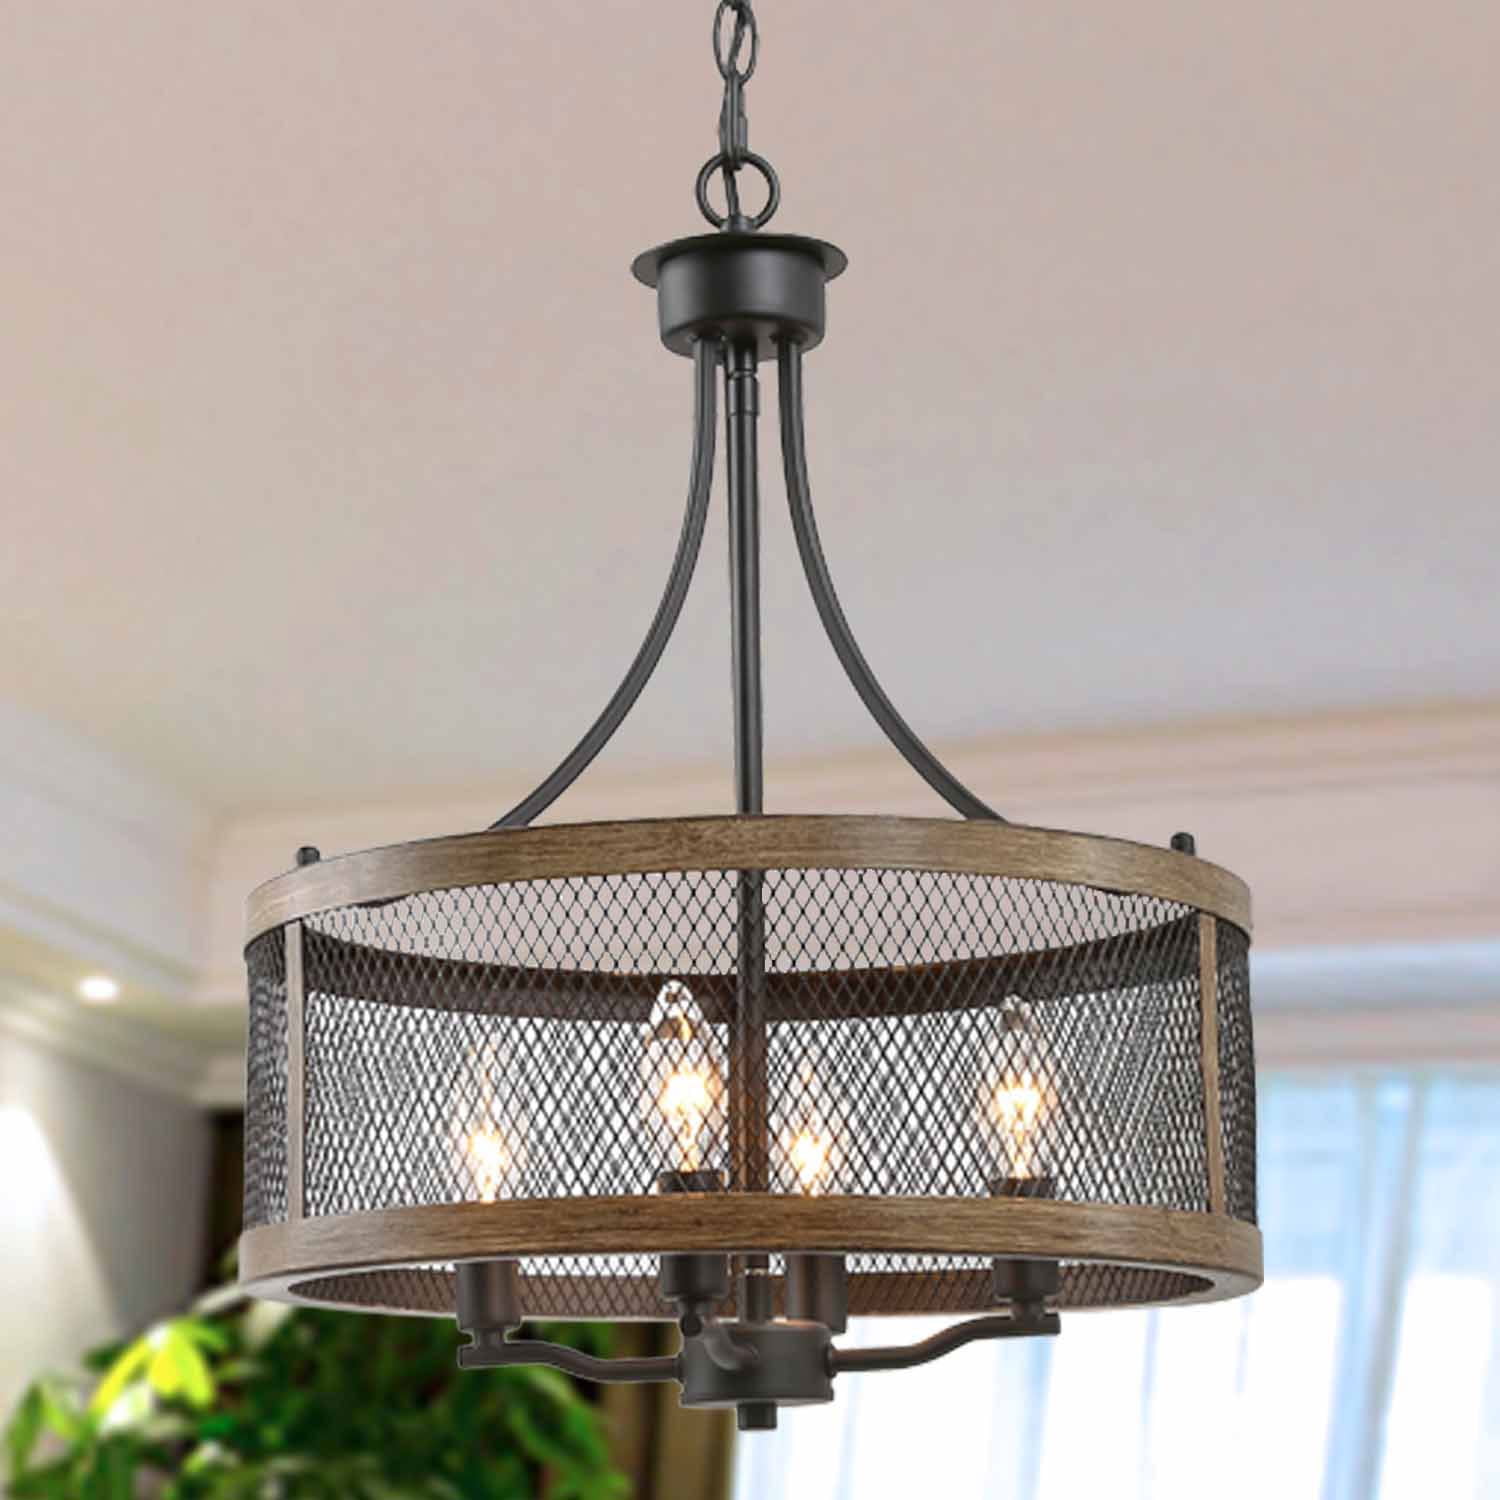 Metallic Chandeliers For Dining Room, Drum Light Fixture For Kitchen Table